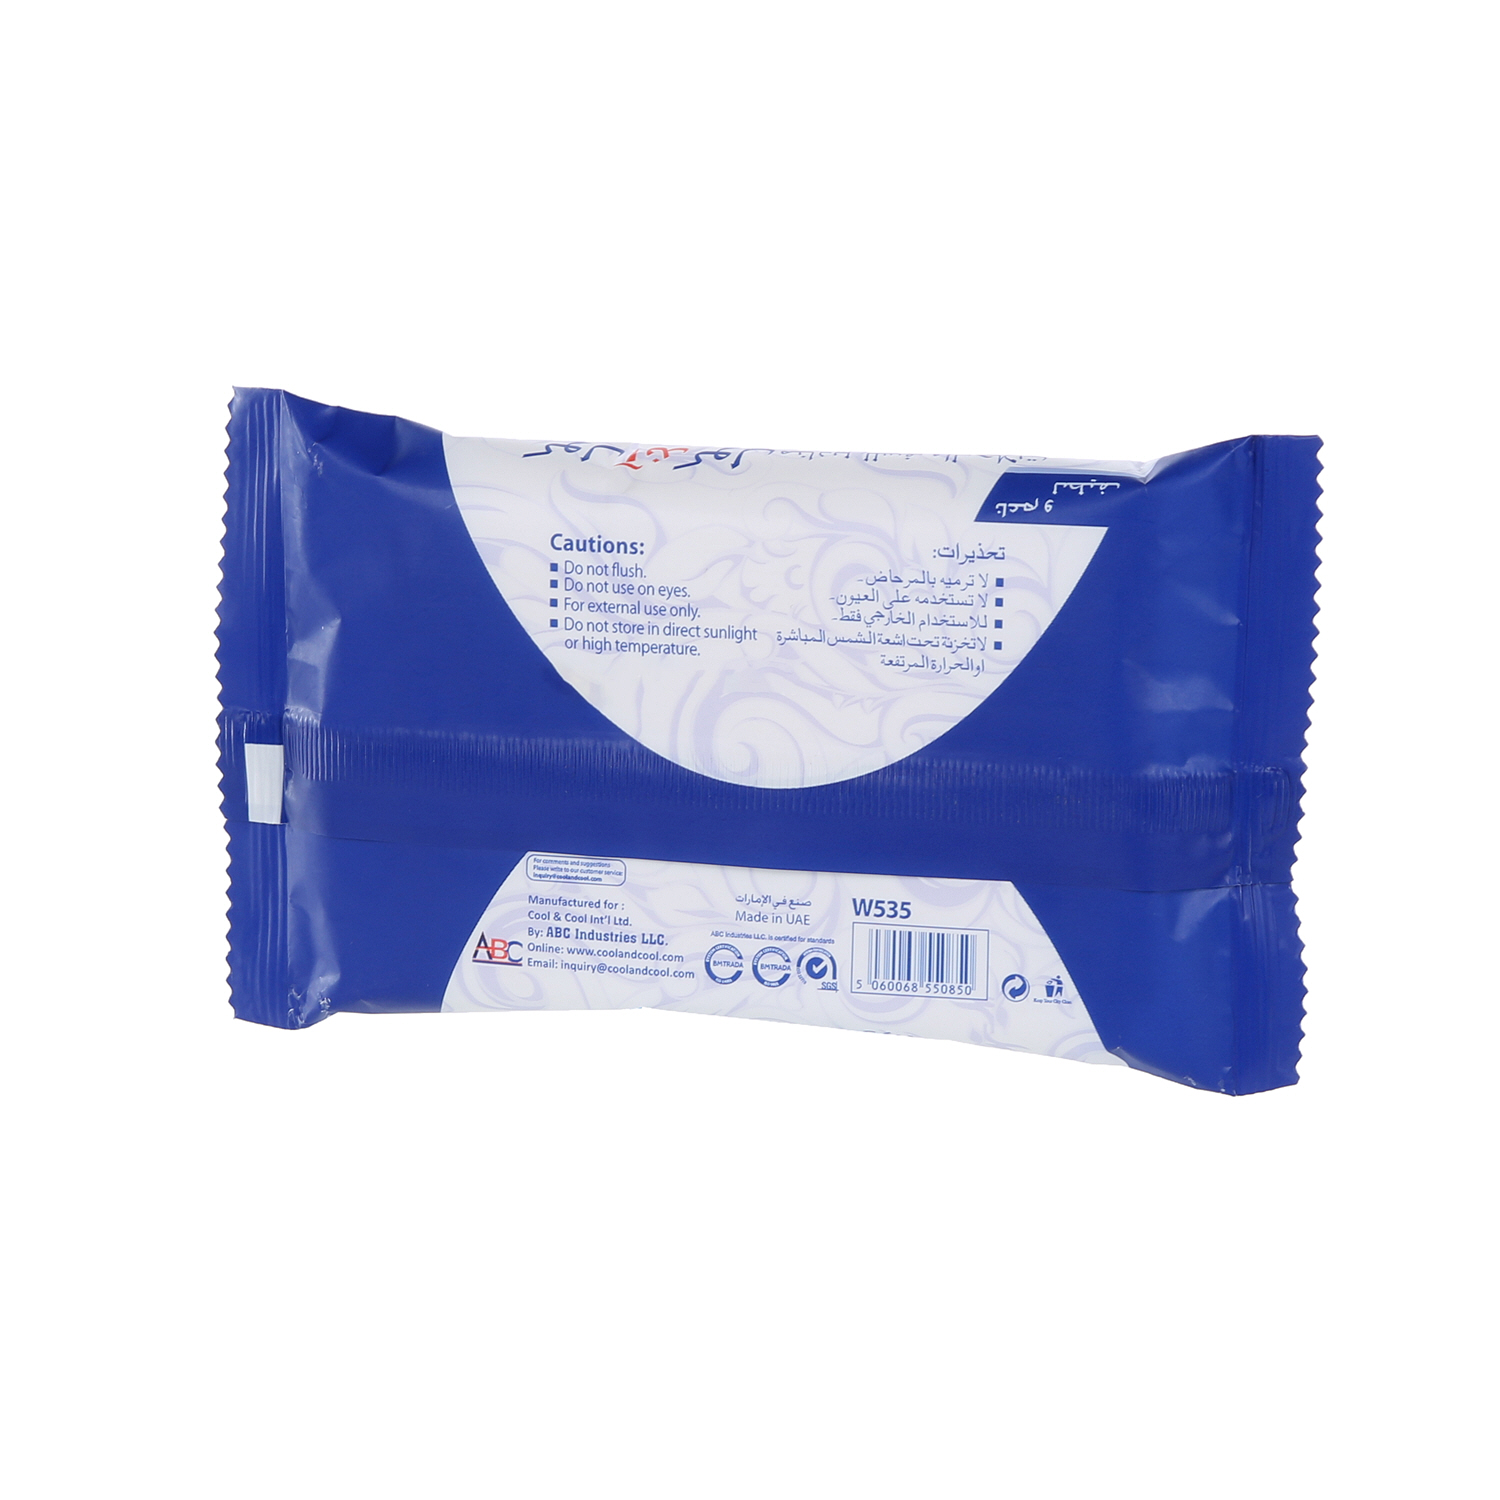 Cool & Cool Travelling Wipes 10 Wipes